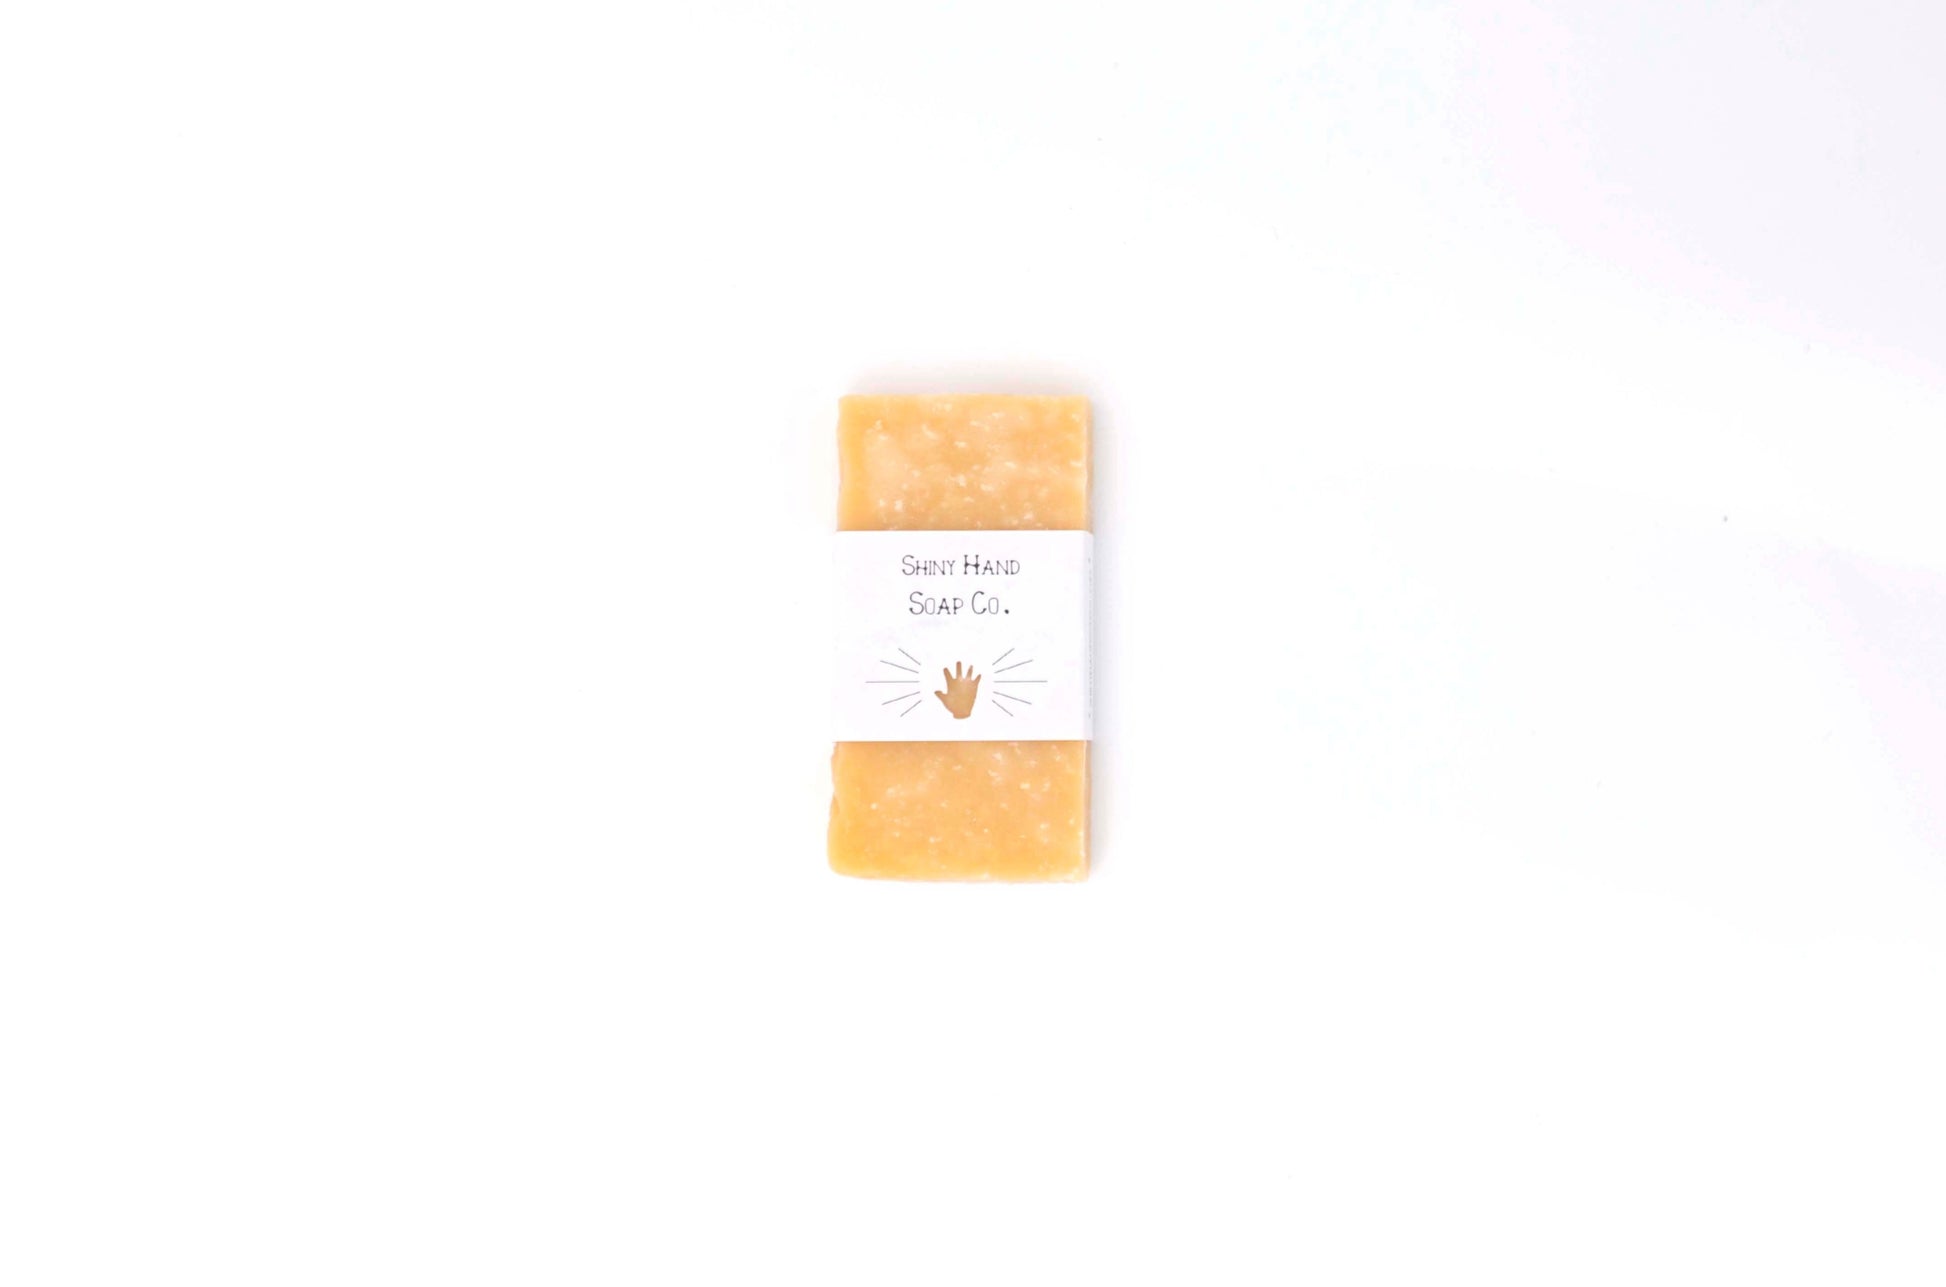 One rich yellow Lemon Sea Salt Mini Sample Soaps flecked with white salt crystals sits on a clean white background in white recyled paper wrapper with a tiny hand cutout.